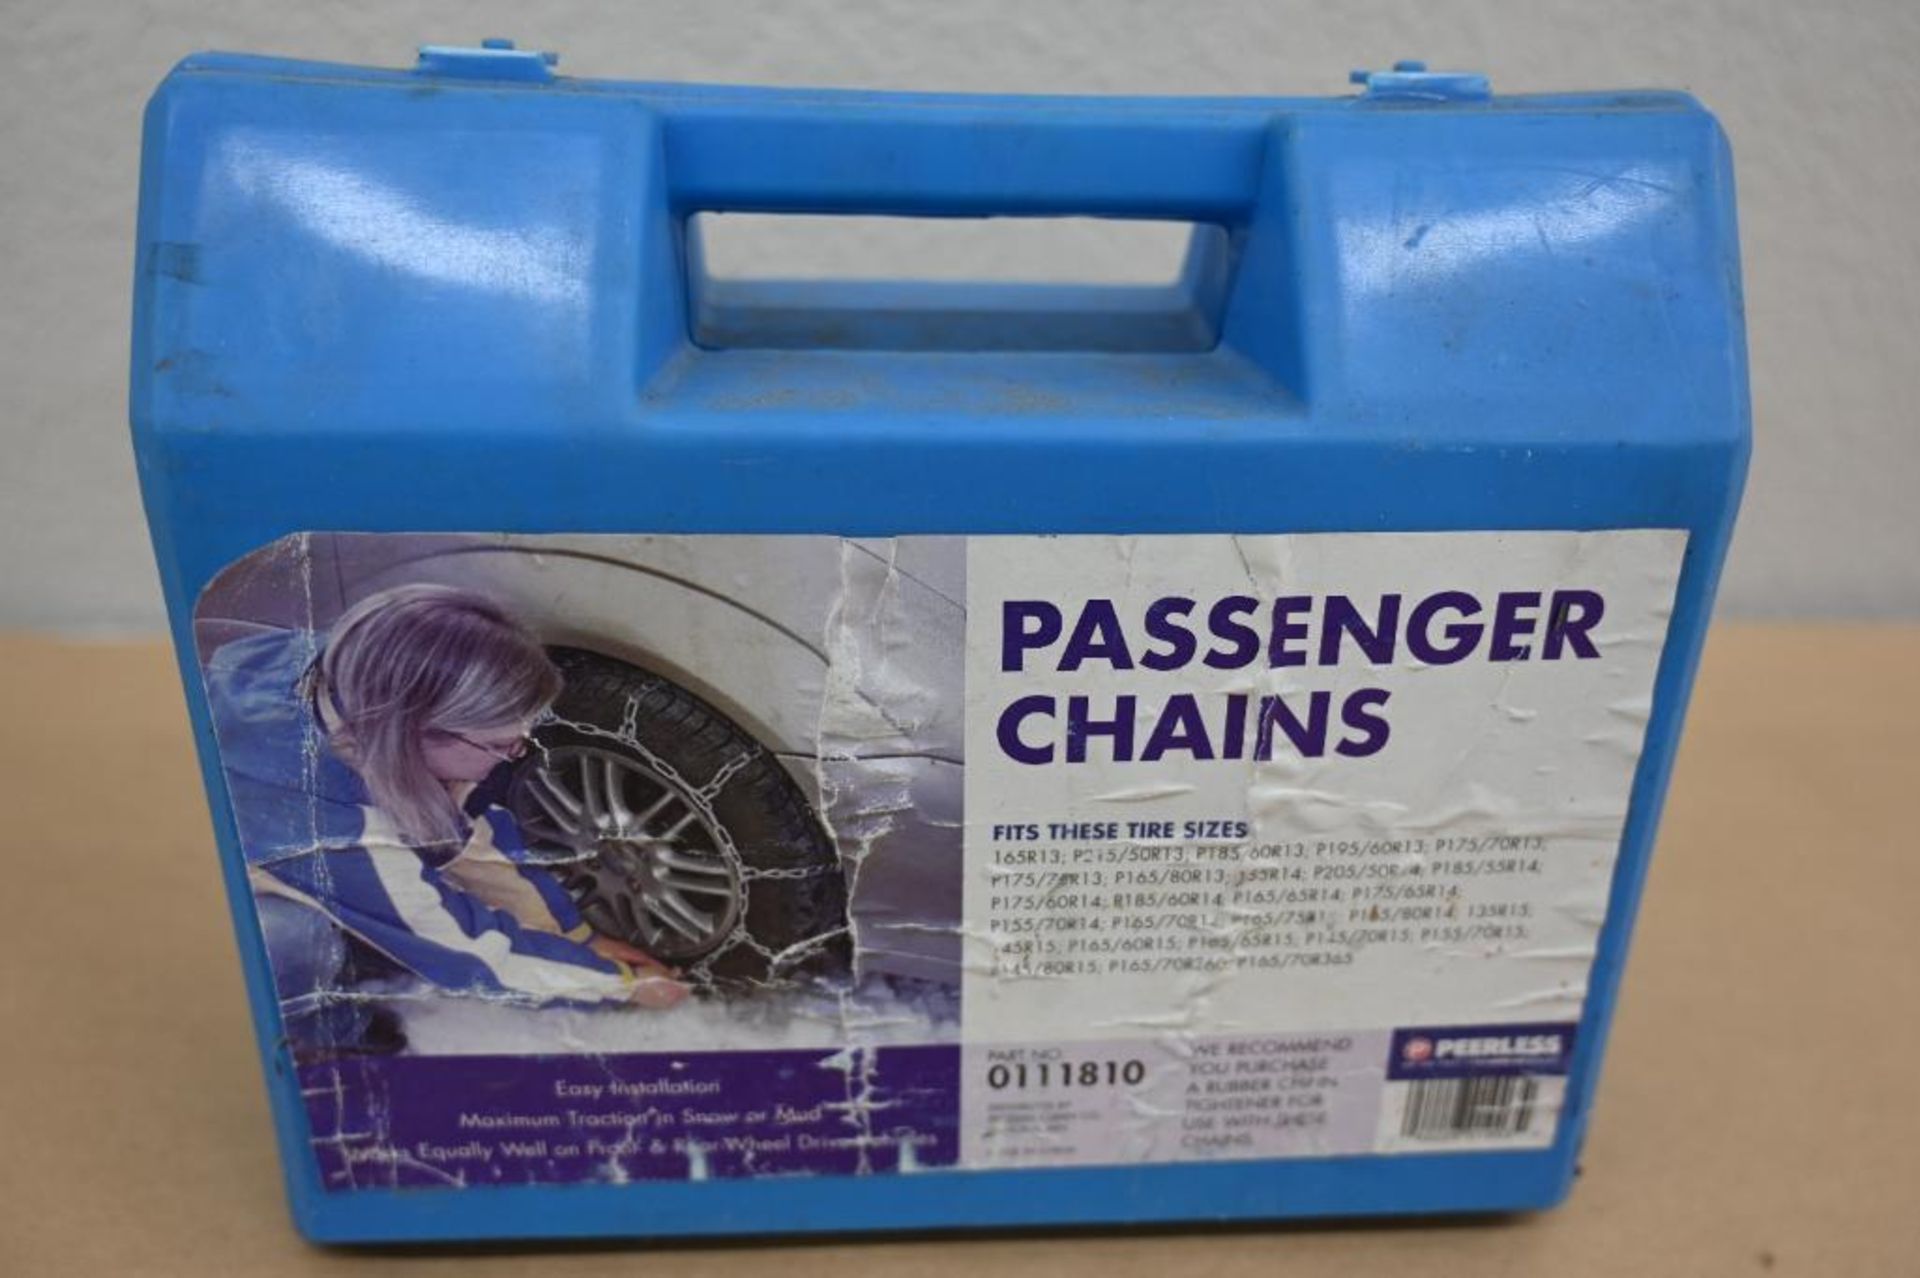 New Tire Chains for 13" - 15" Tires - Image 2 of 5